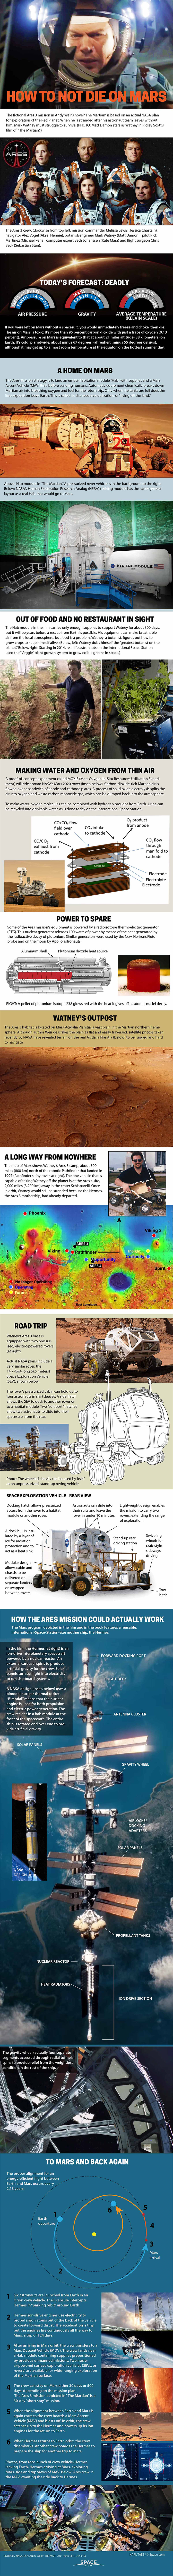 The Martian How Not To Die in Mars Infographic